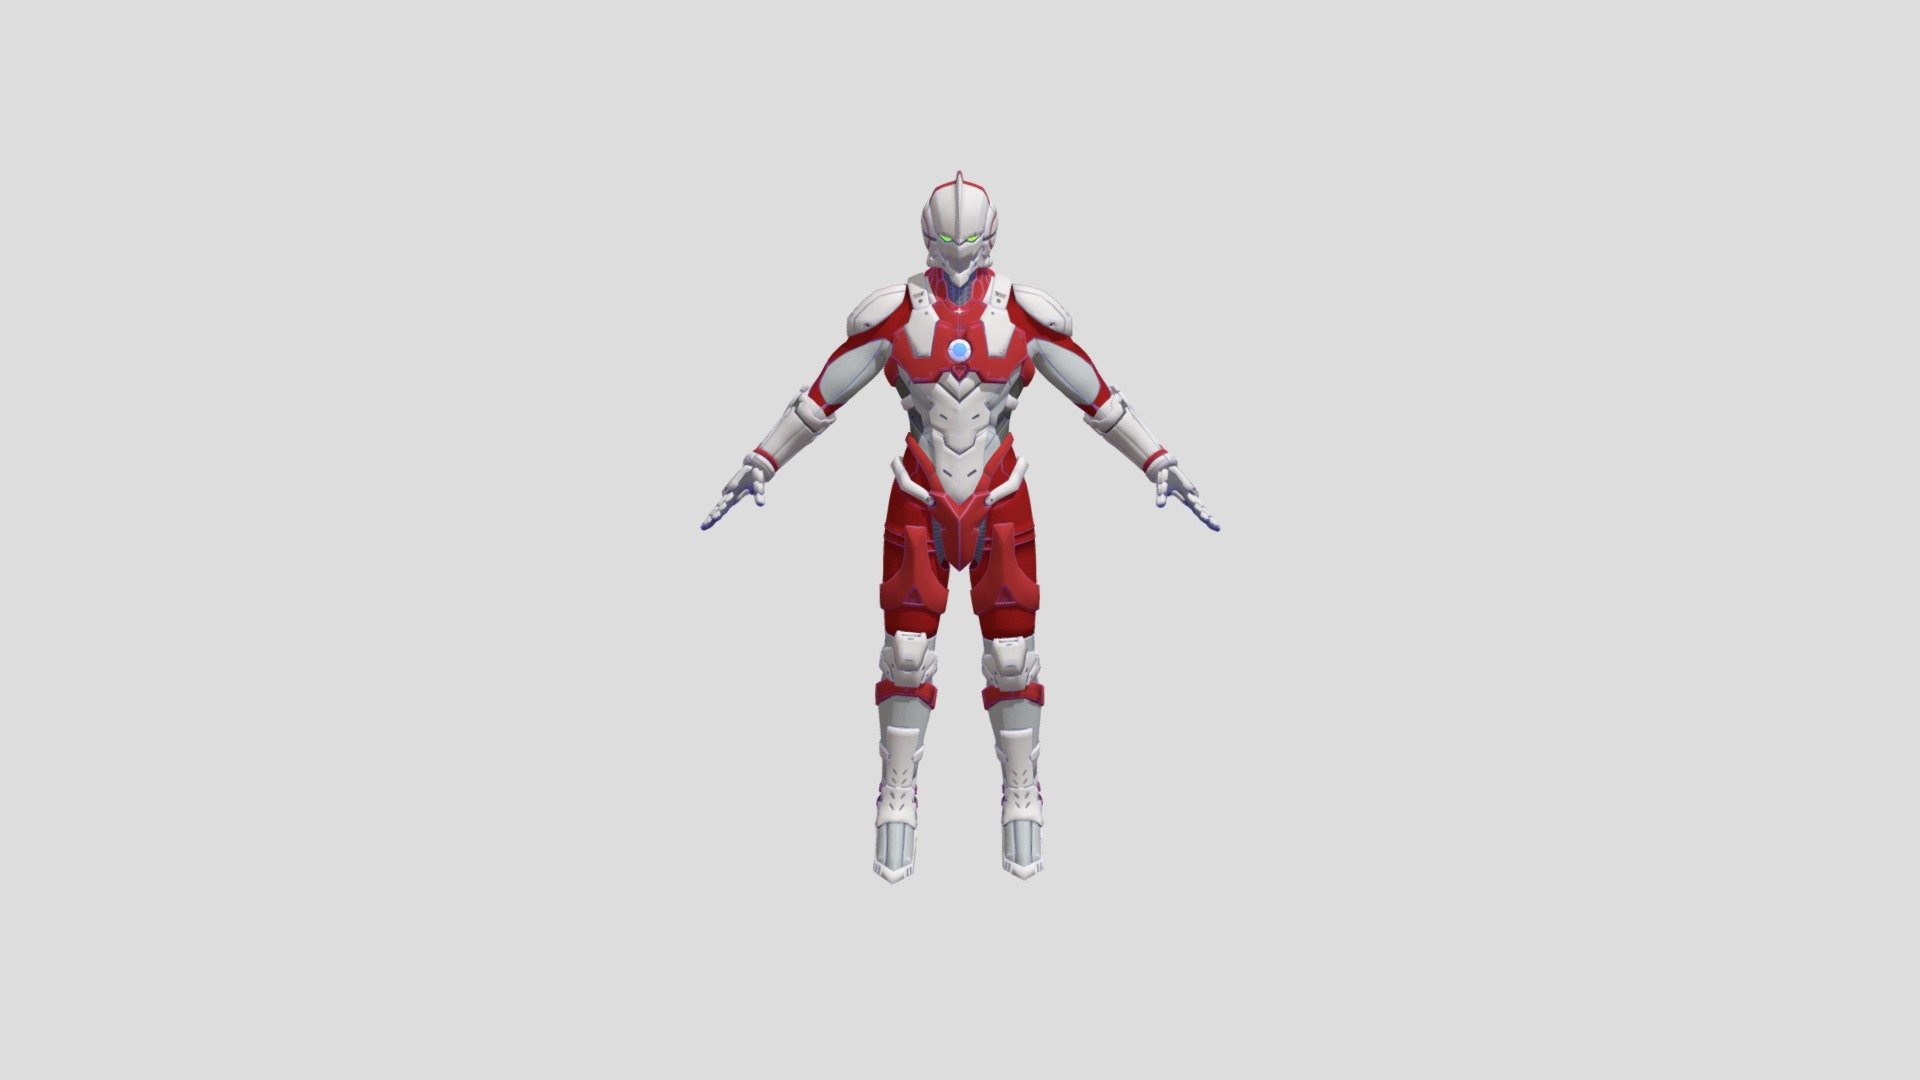 here is Ultraman From Override 2 Ultraman Deluxe Edition Hope you guy like it

Disclaimer: I don't own this model or the Ultraman Franchise or Override 2 they Belong to Tsuburaya Productions Netflix and Modus Studios Brazil (formerly The Balance, Inc.) and published by Modus Games Please Support The Official Release 3d model